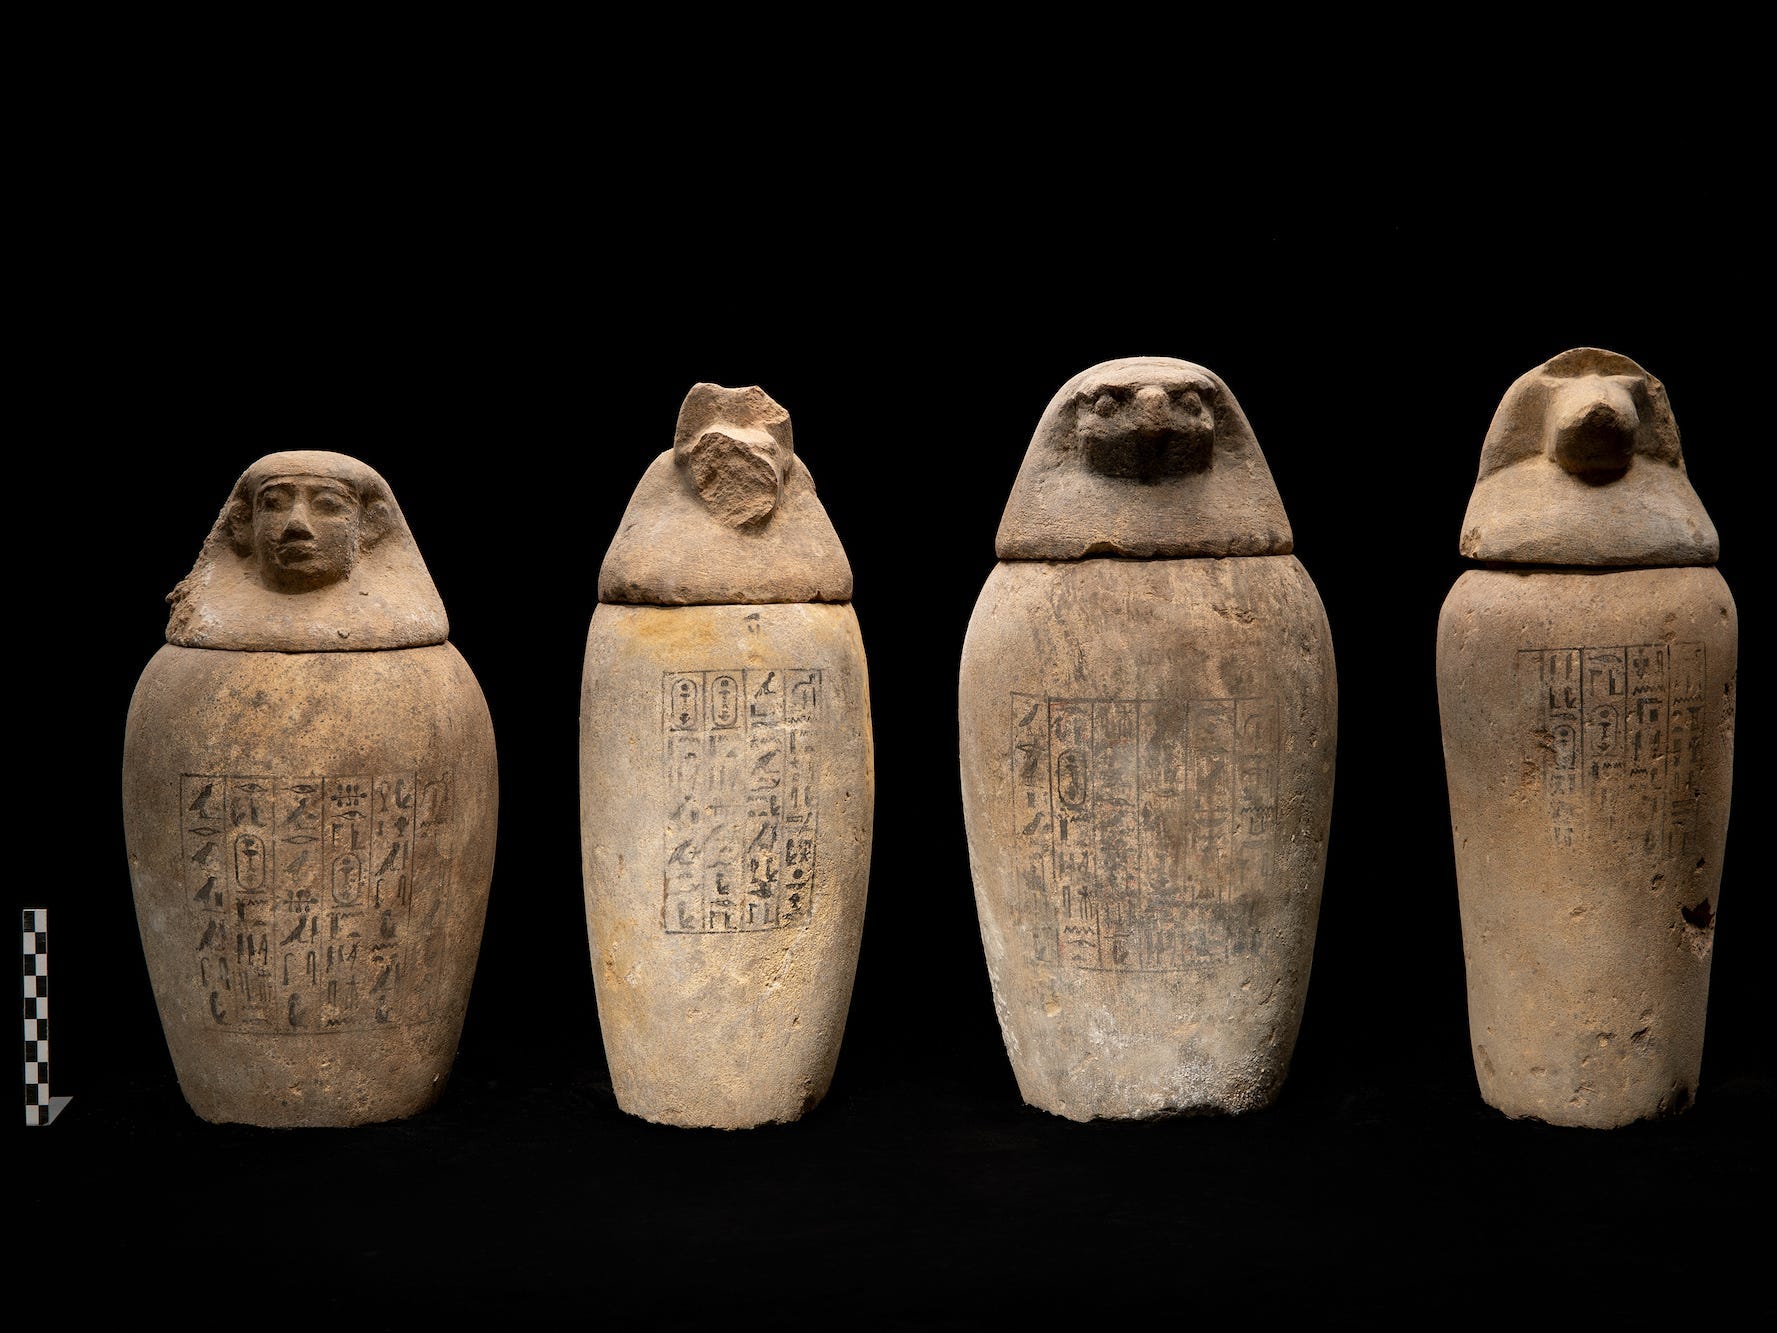 Ceramic jars found in the Abusir embalming shaft.